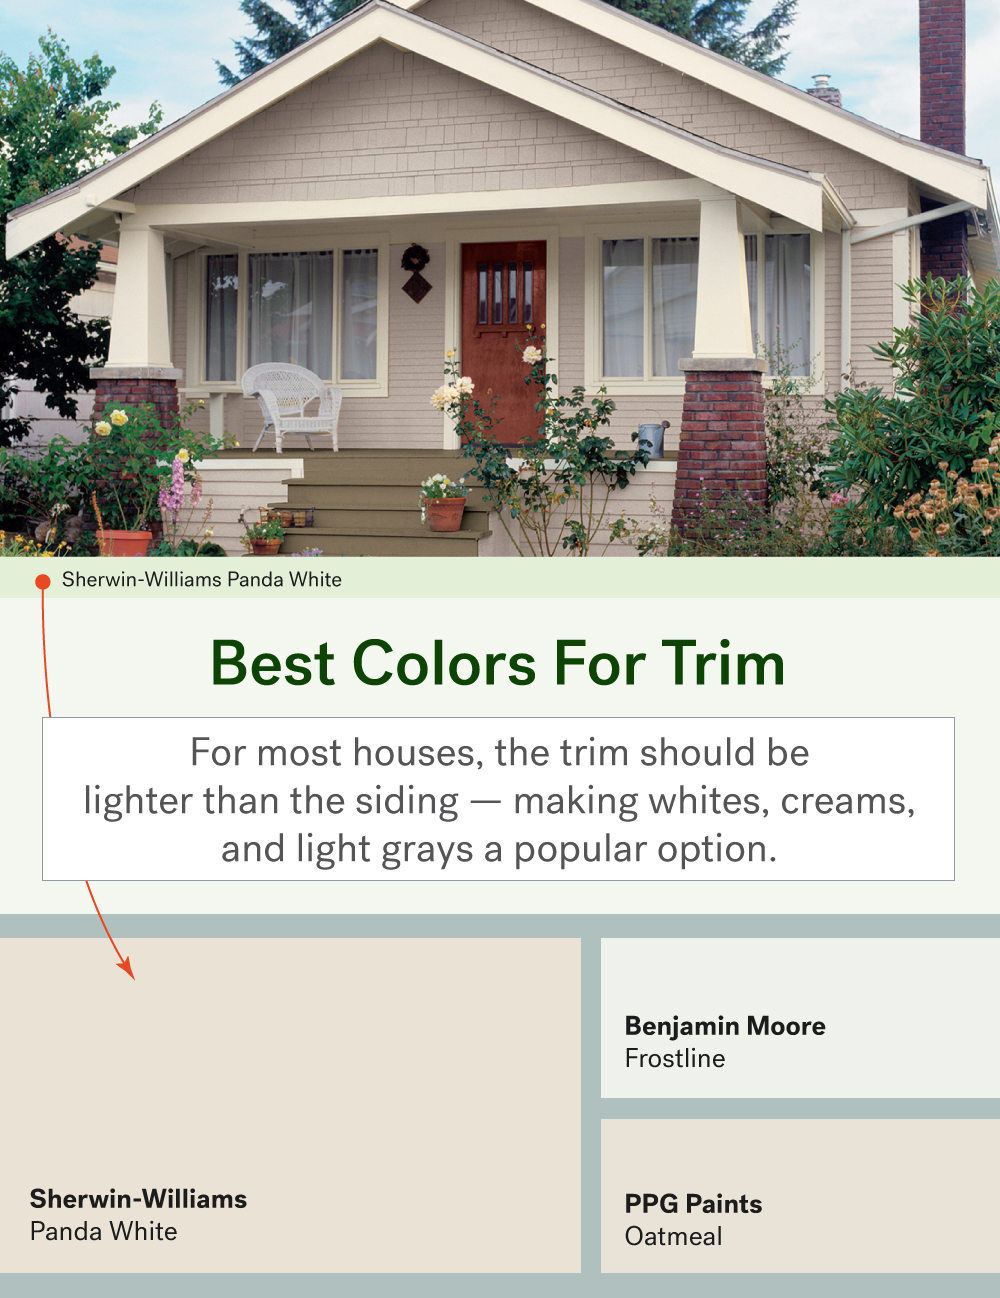 The Most Popular Exterior Paint Colors Life at Home Trulia Blog